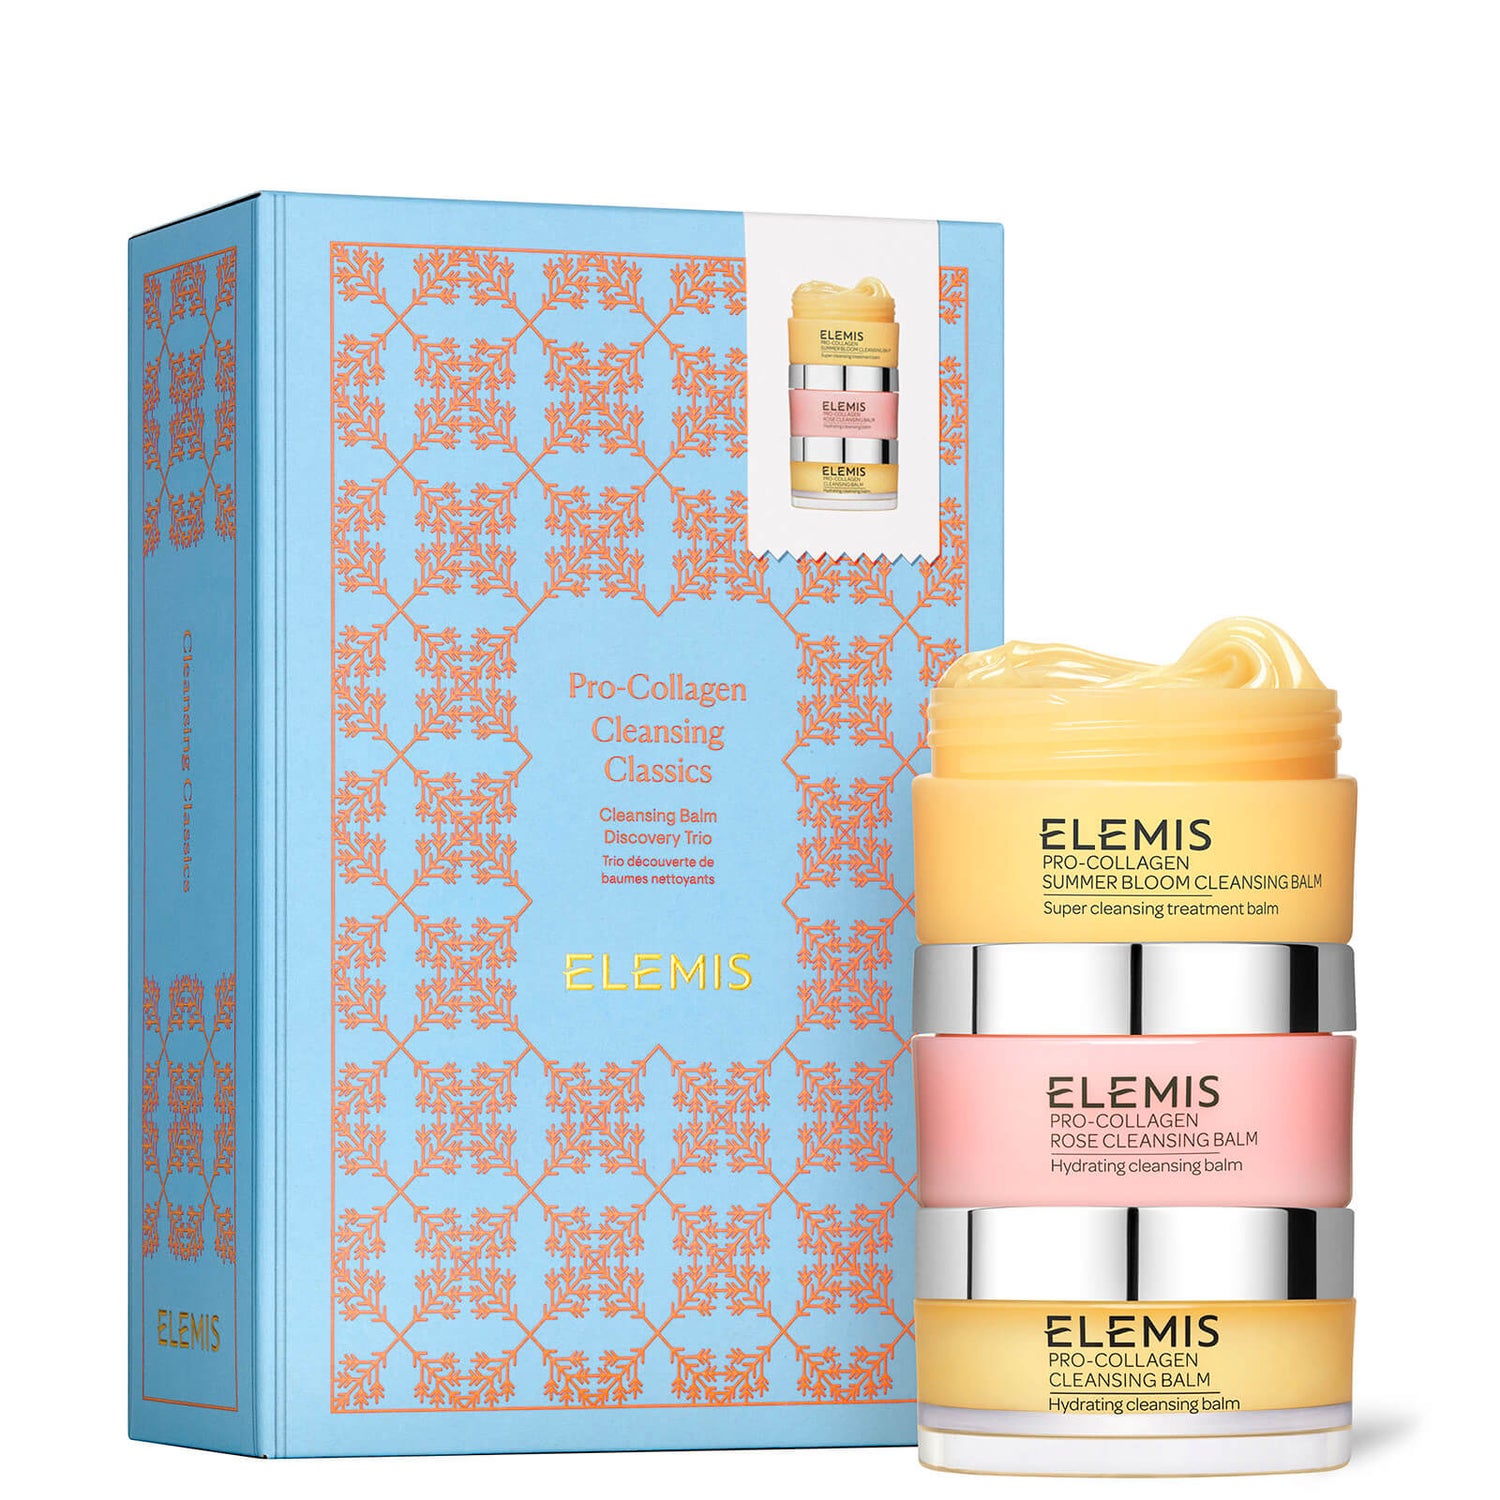 Elemis Pro-Collagen Cleansing Classics Kit - Discovery Trio (Worth $100.00)